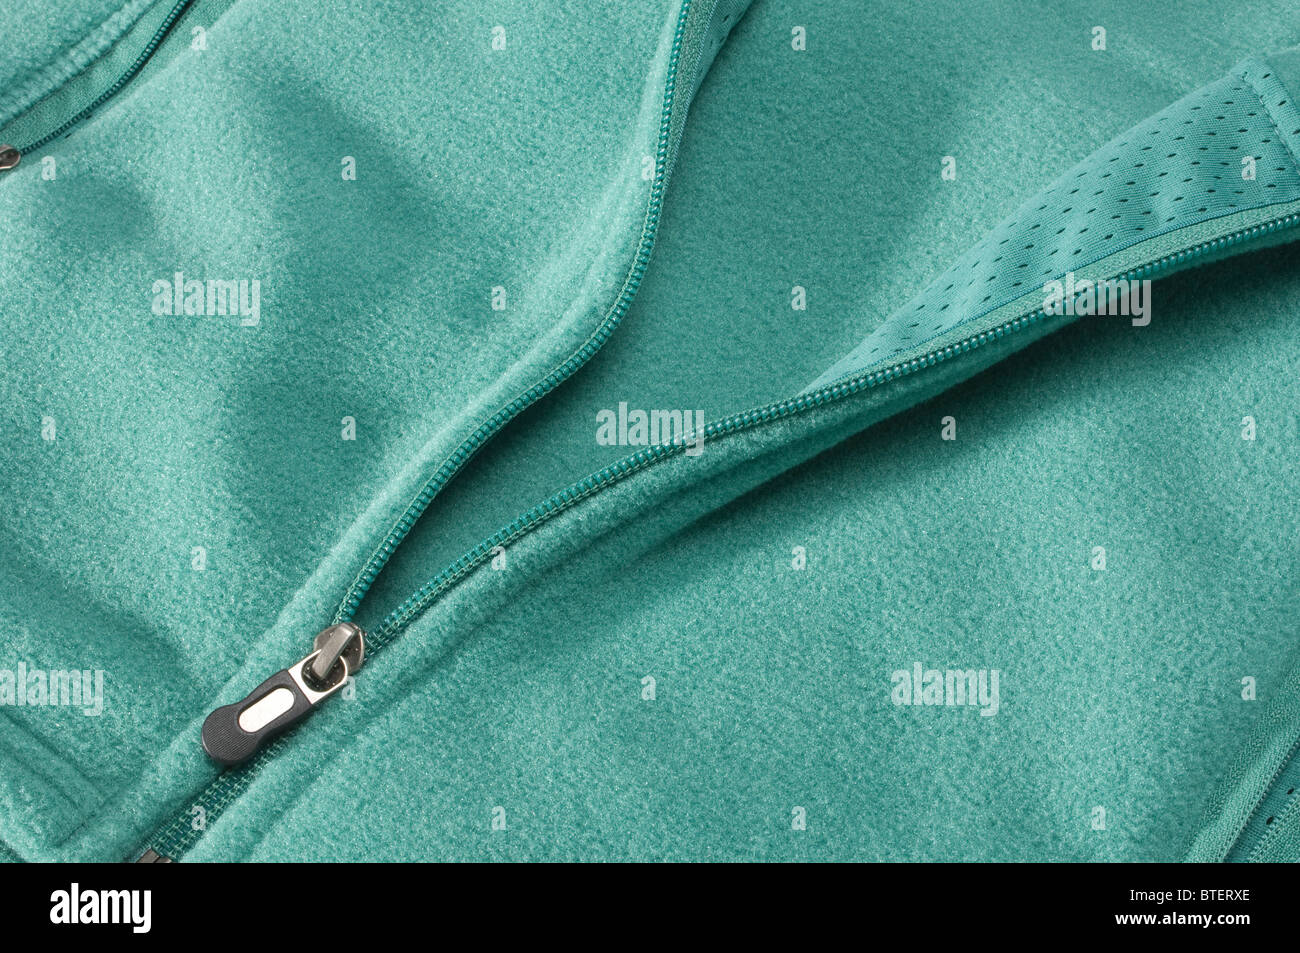 Close-up view of a green pastel colored jacket and the zipper section opening Stock Photo